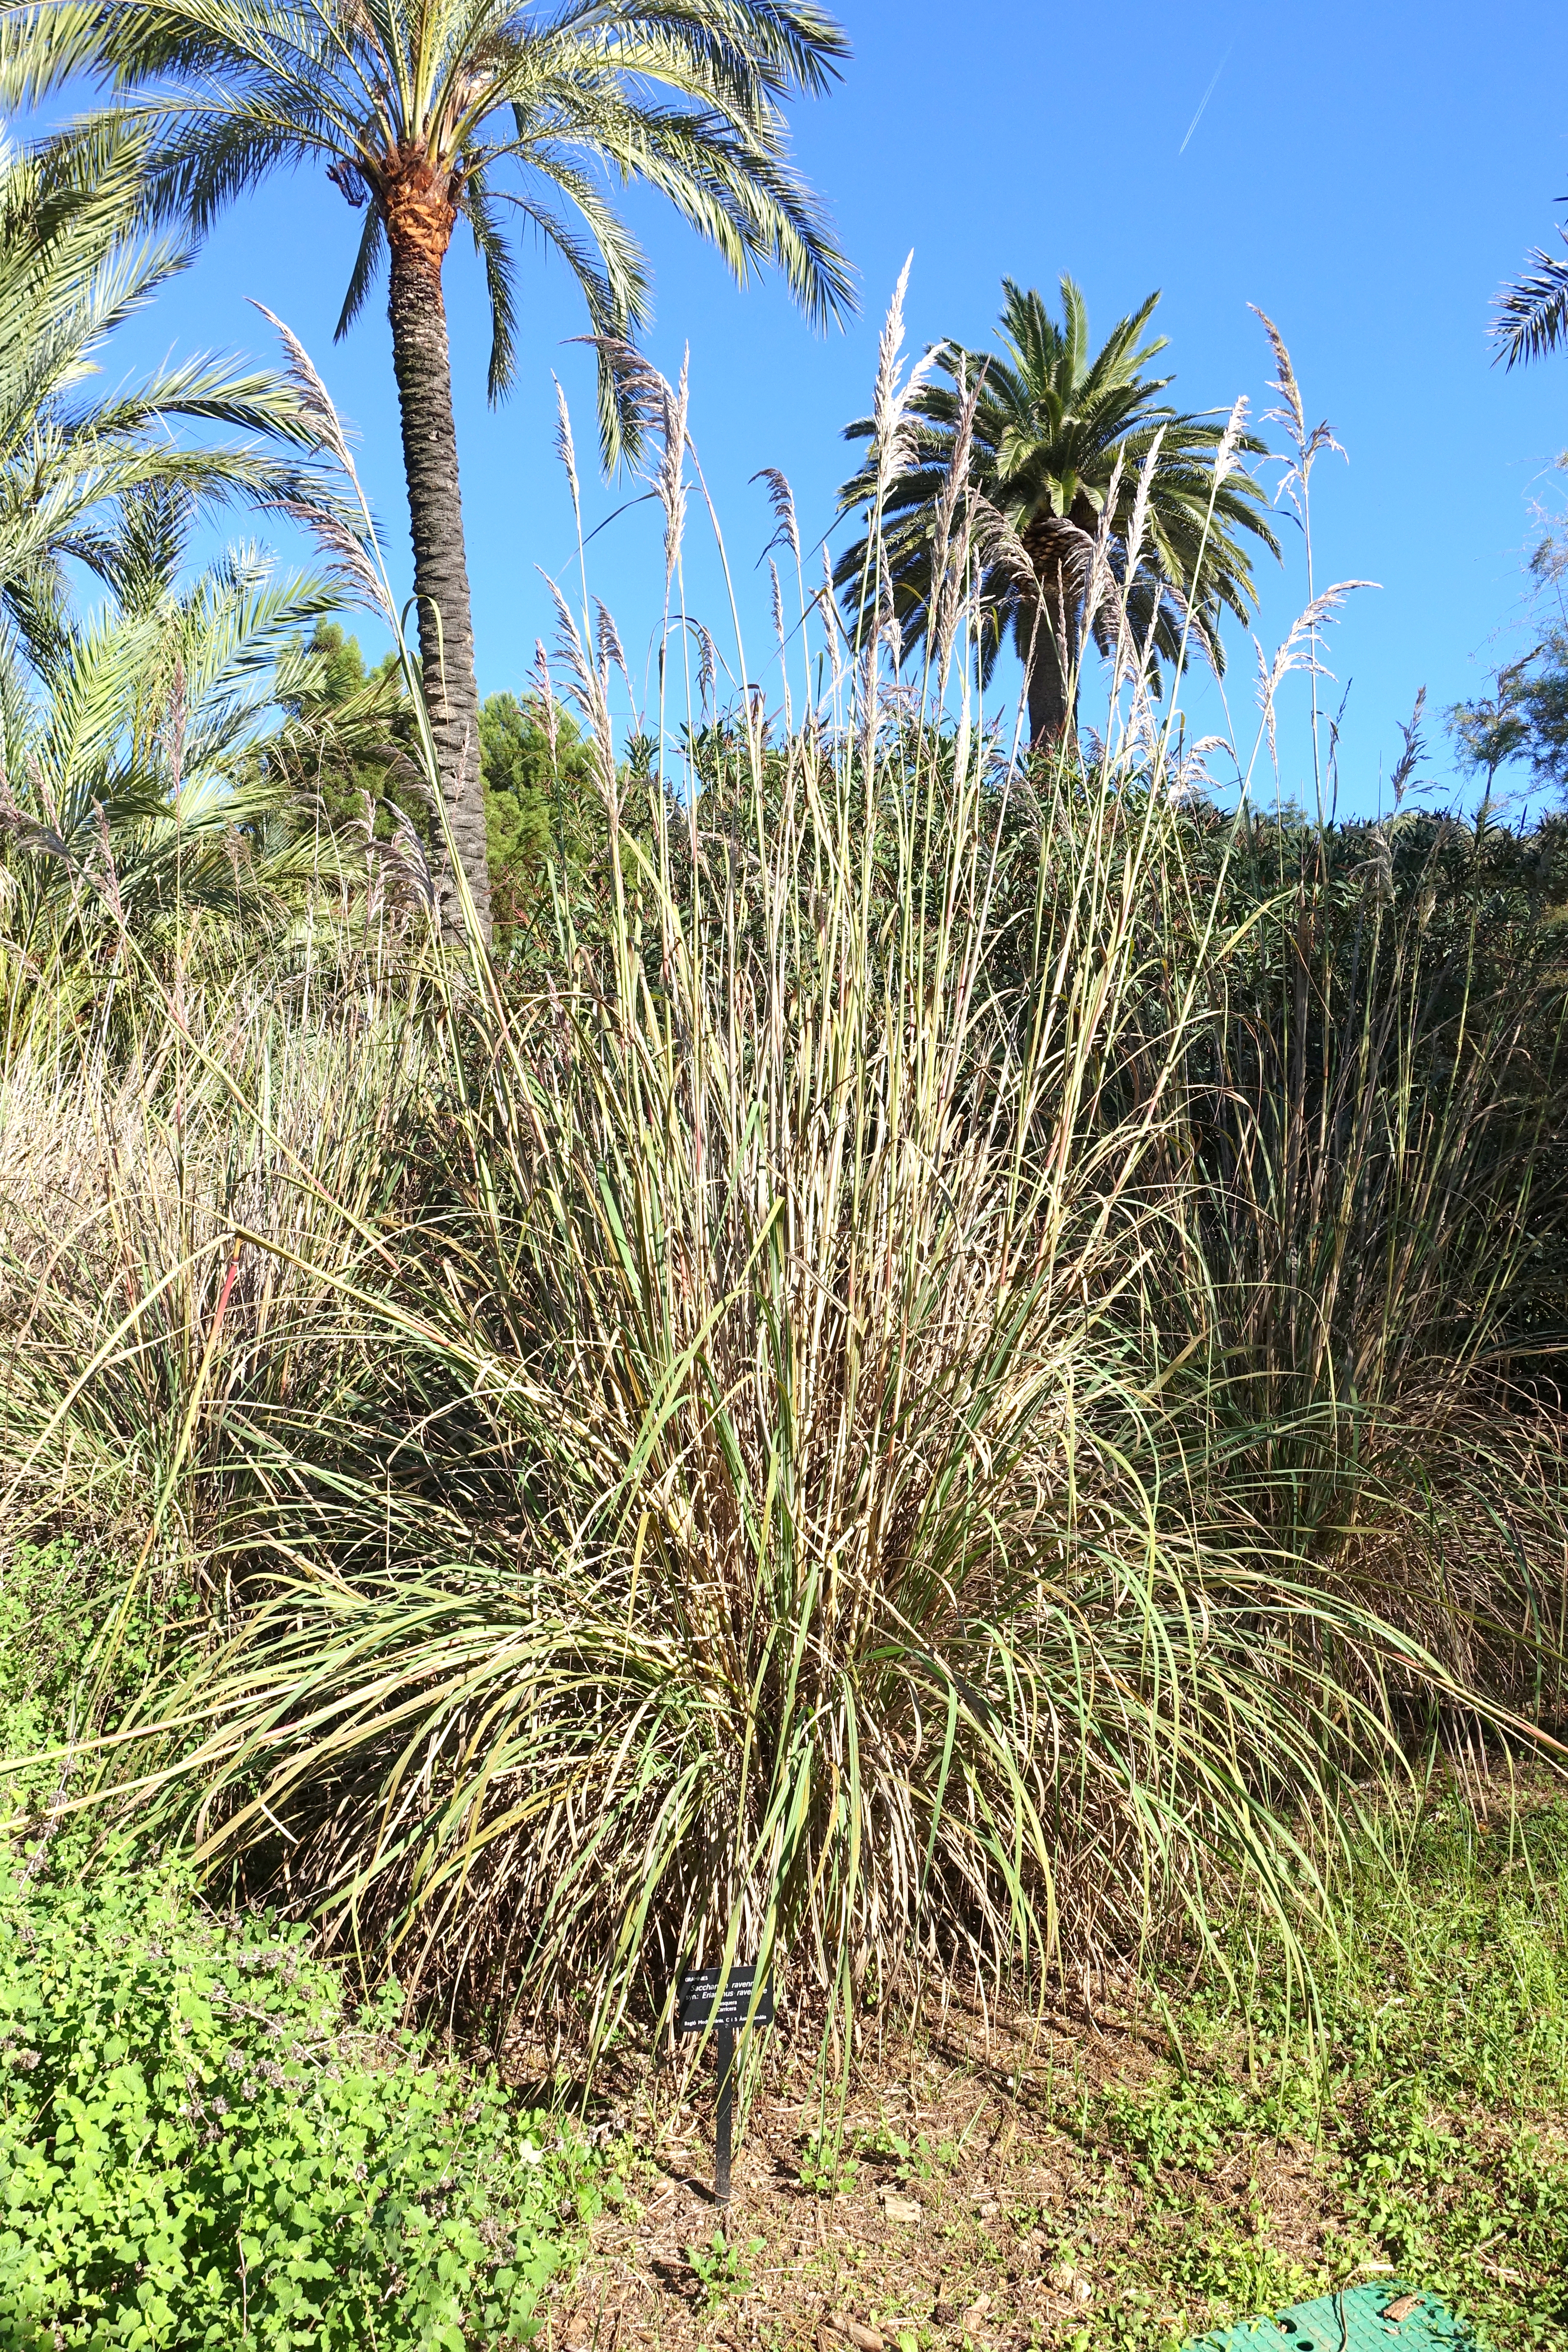 Bunchy growth habit and tall stalks topped with plumed inflorescences